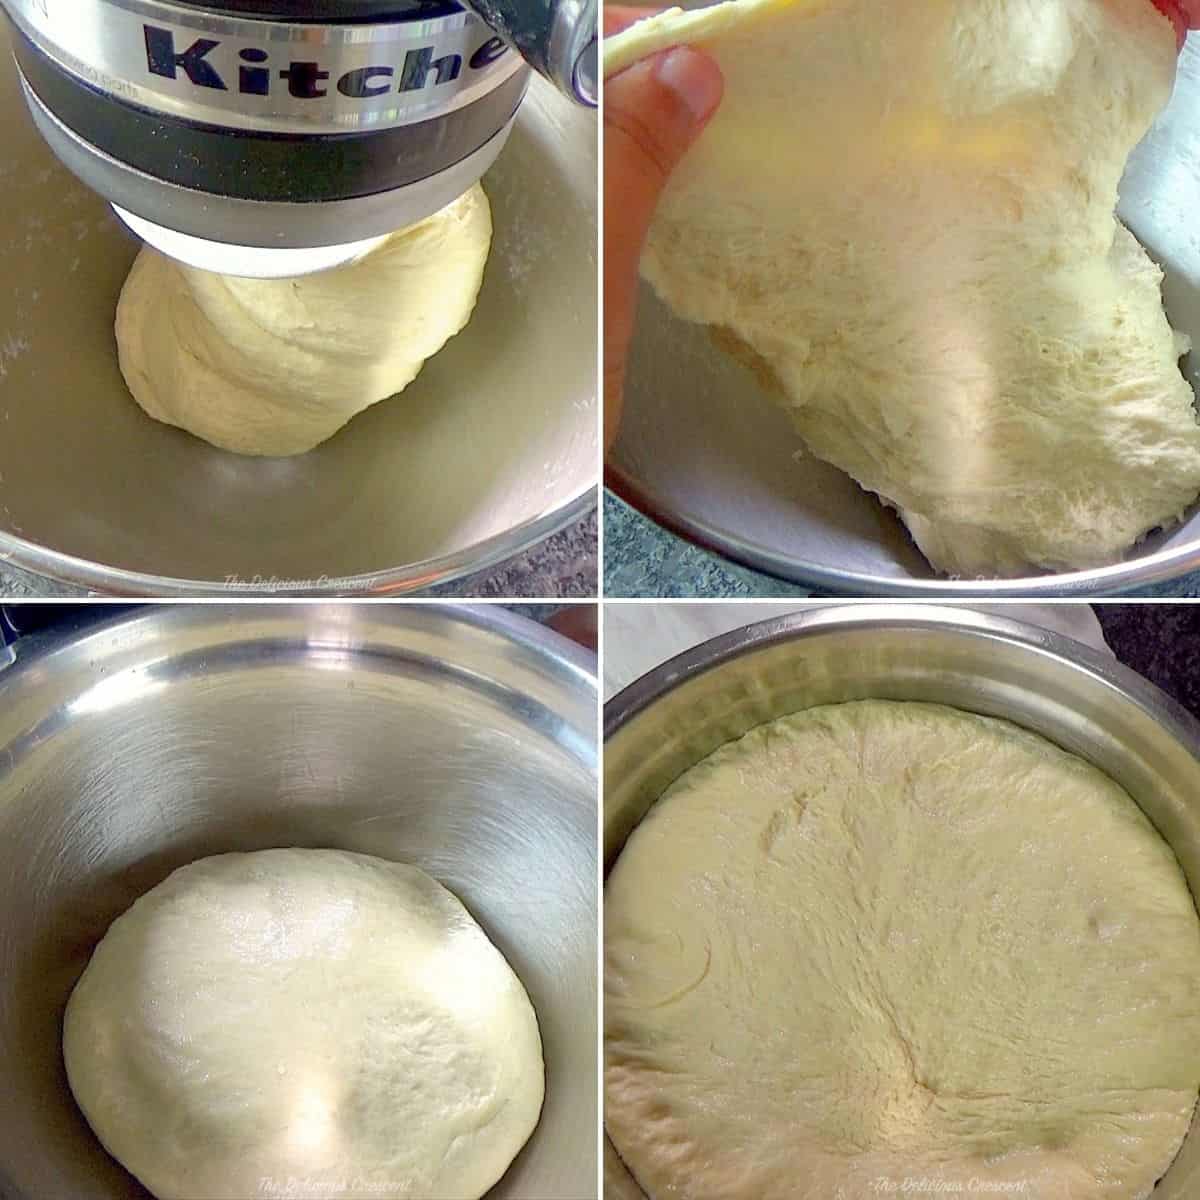 Knead the dough and let it rise to double in bulk.